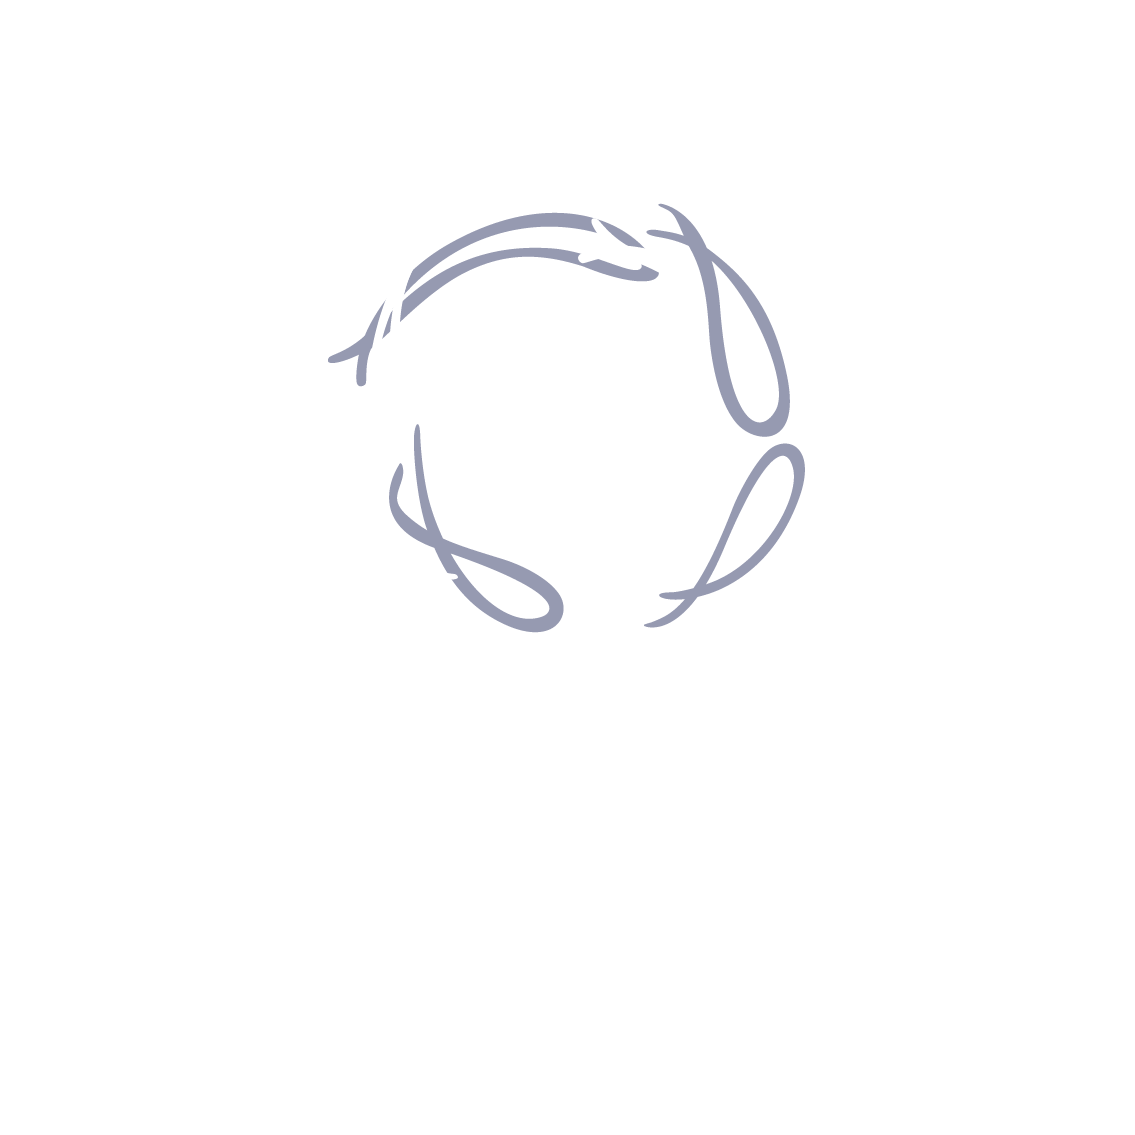 Eyre Peninsula Seafoods